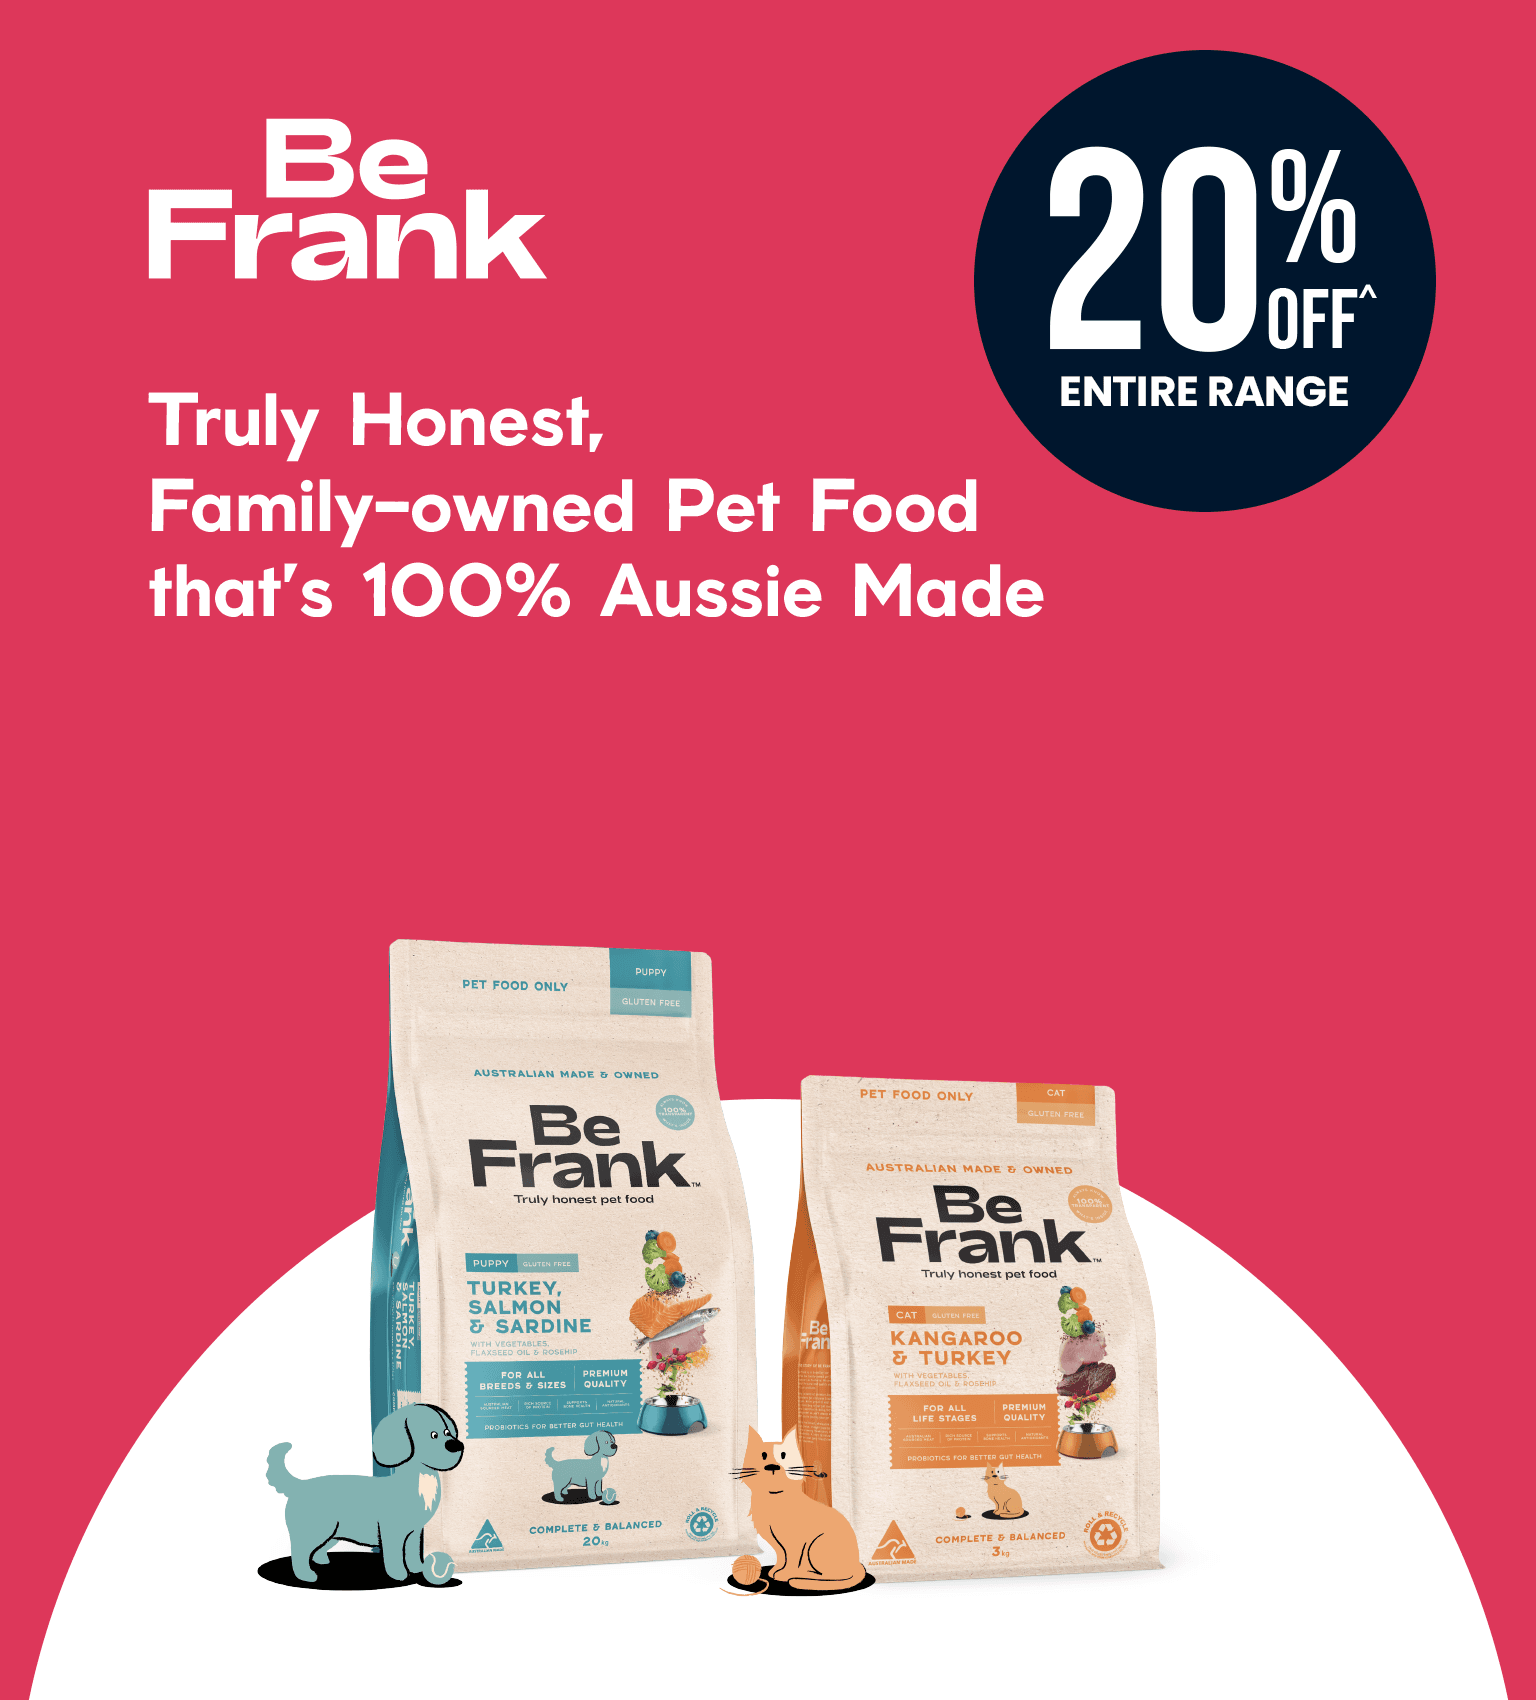 Be Frank - Truly Honest, Family-owned Pet Food that’s 100% Aussie Made - 20% OFF Entire Range